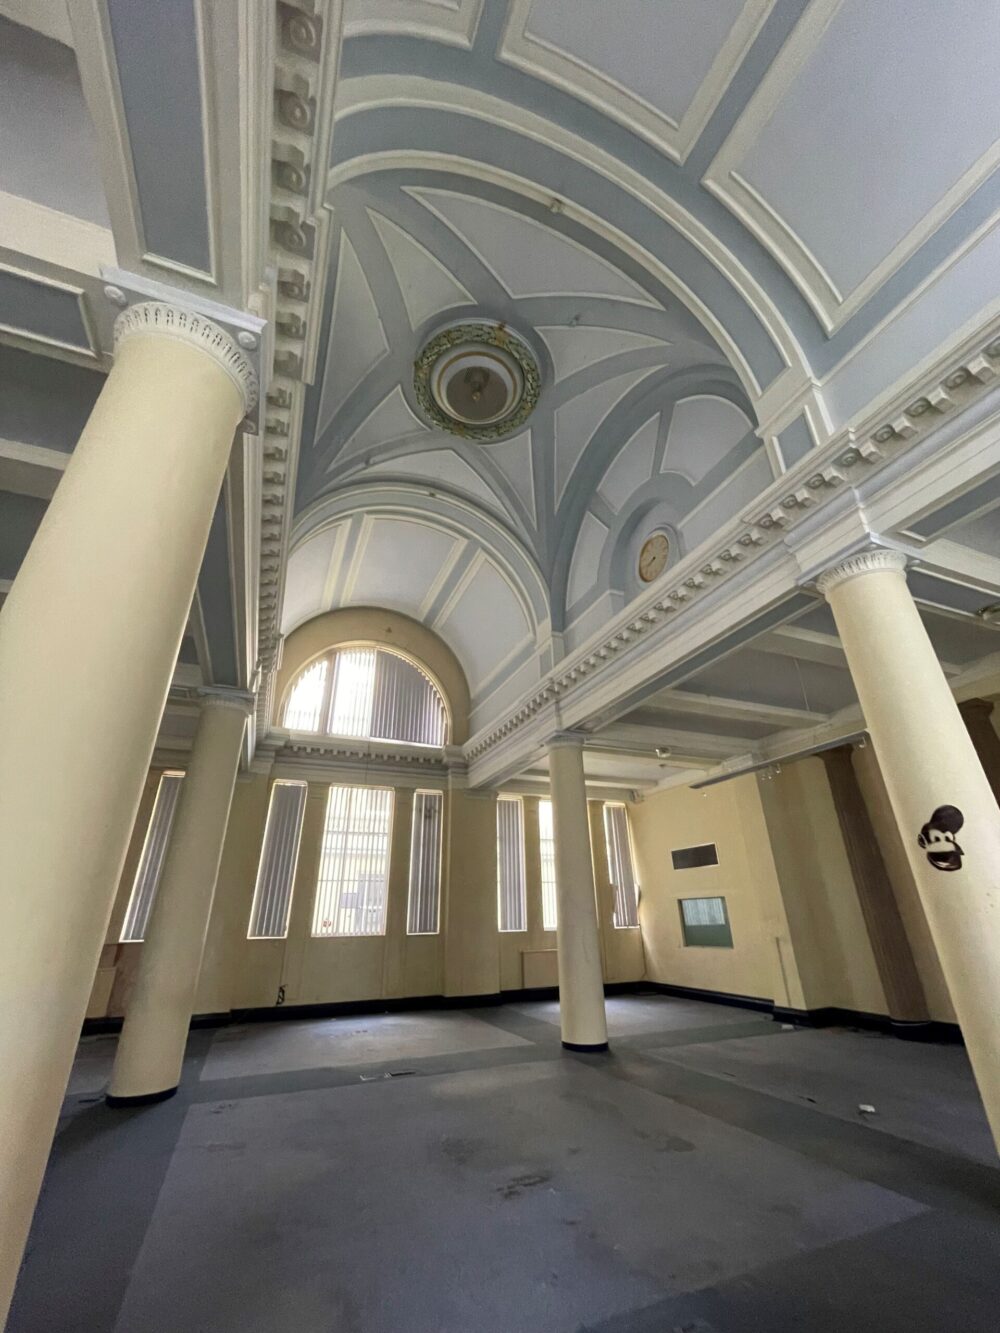 The former Bank of England Liverpool branch, 31 Castle Street - internal. Image provided by The Ivy